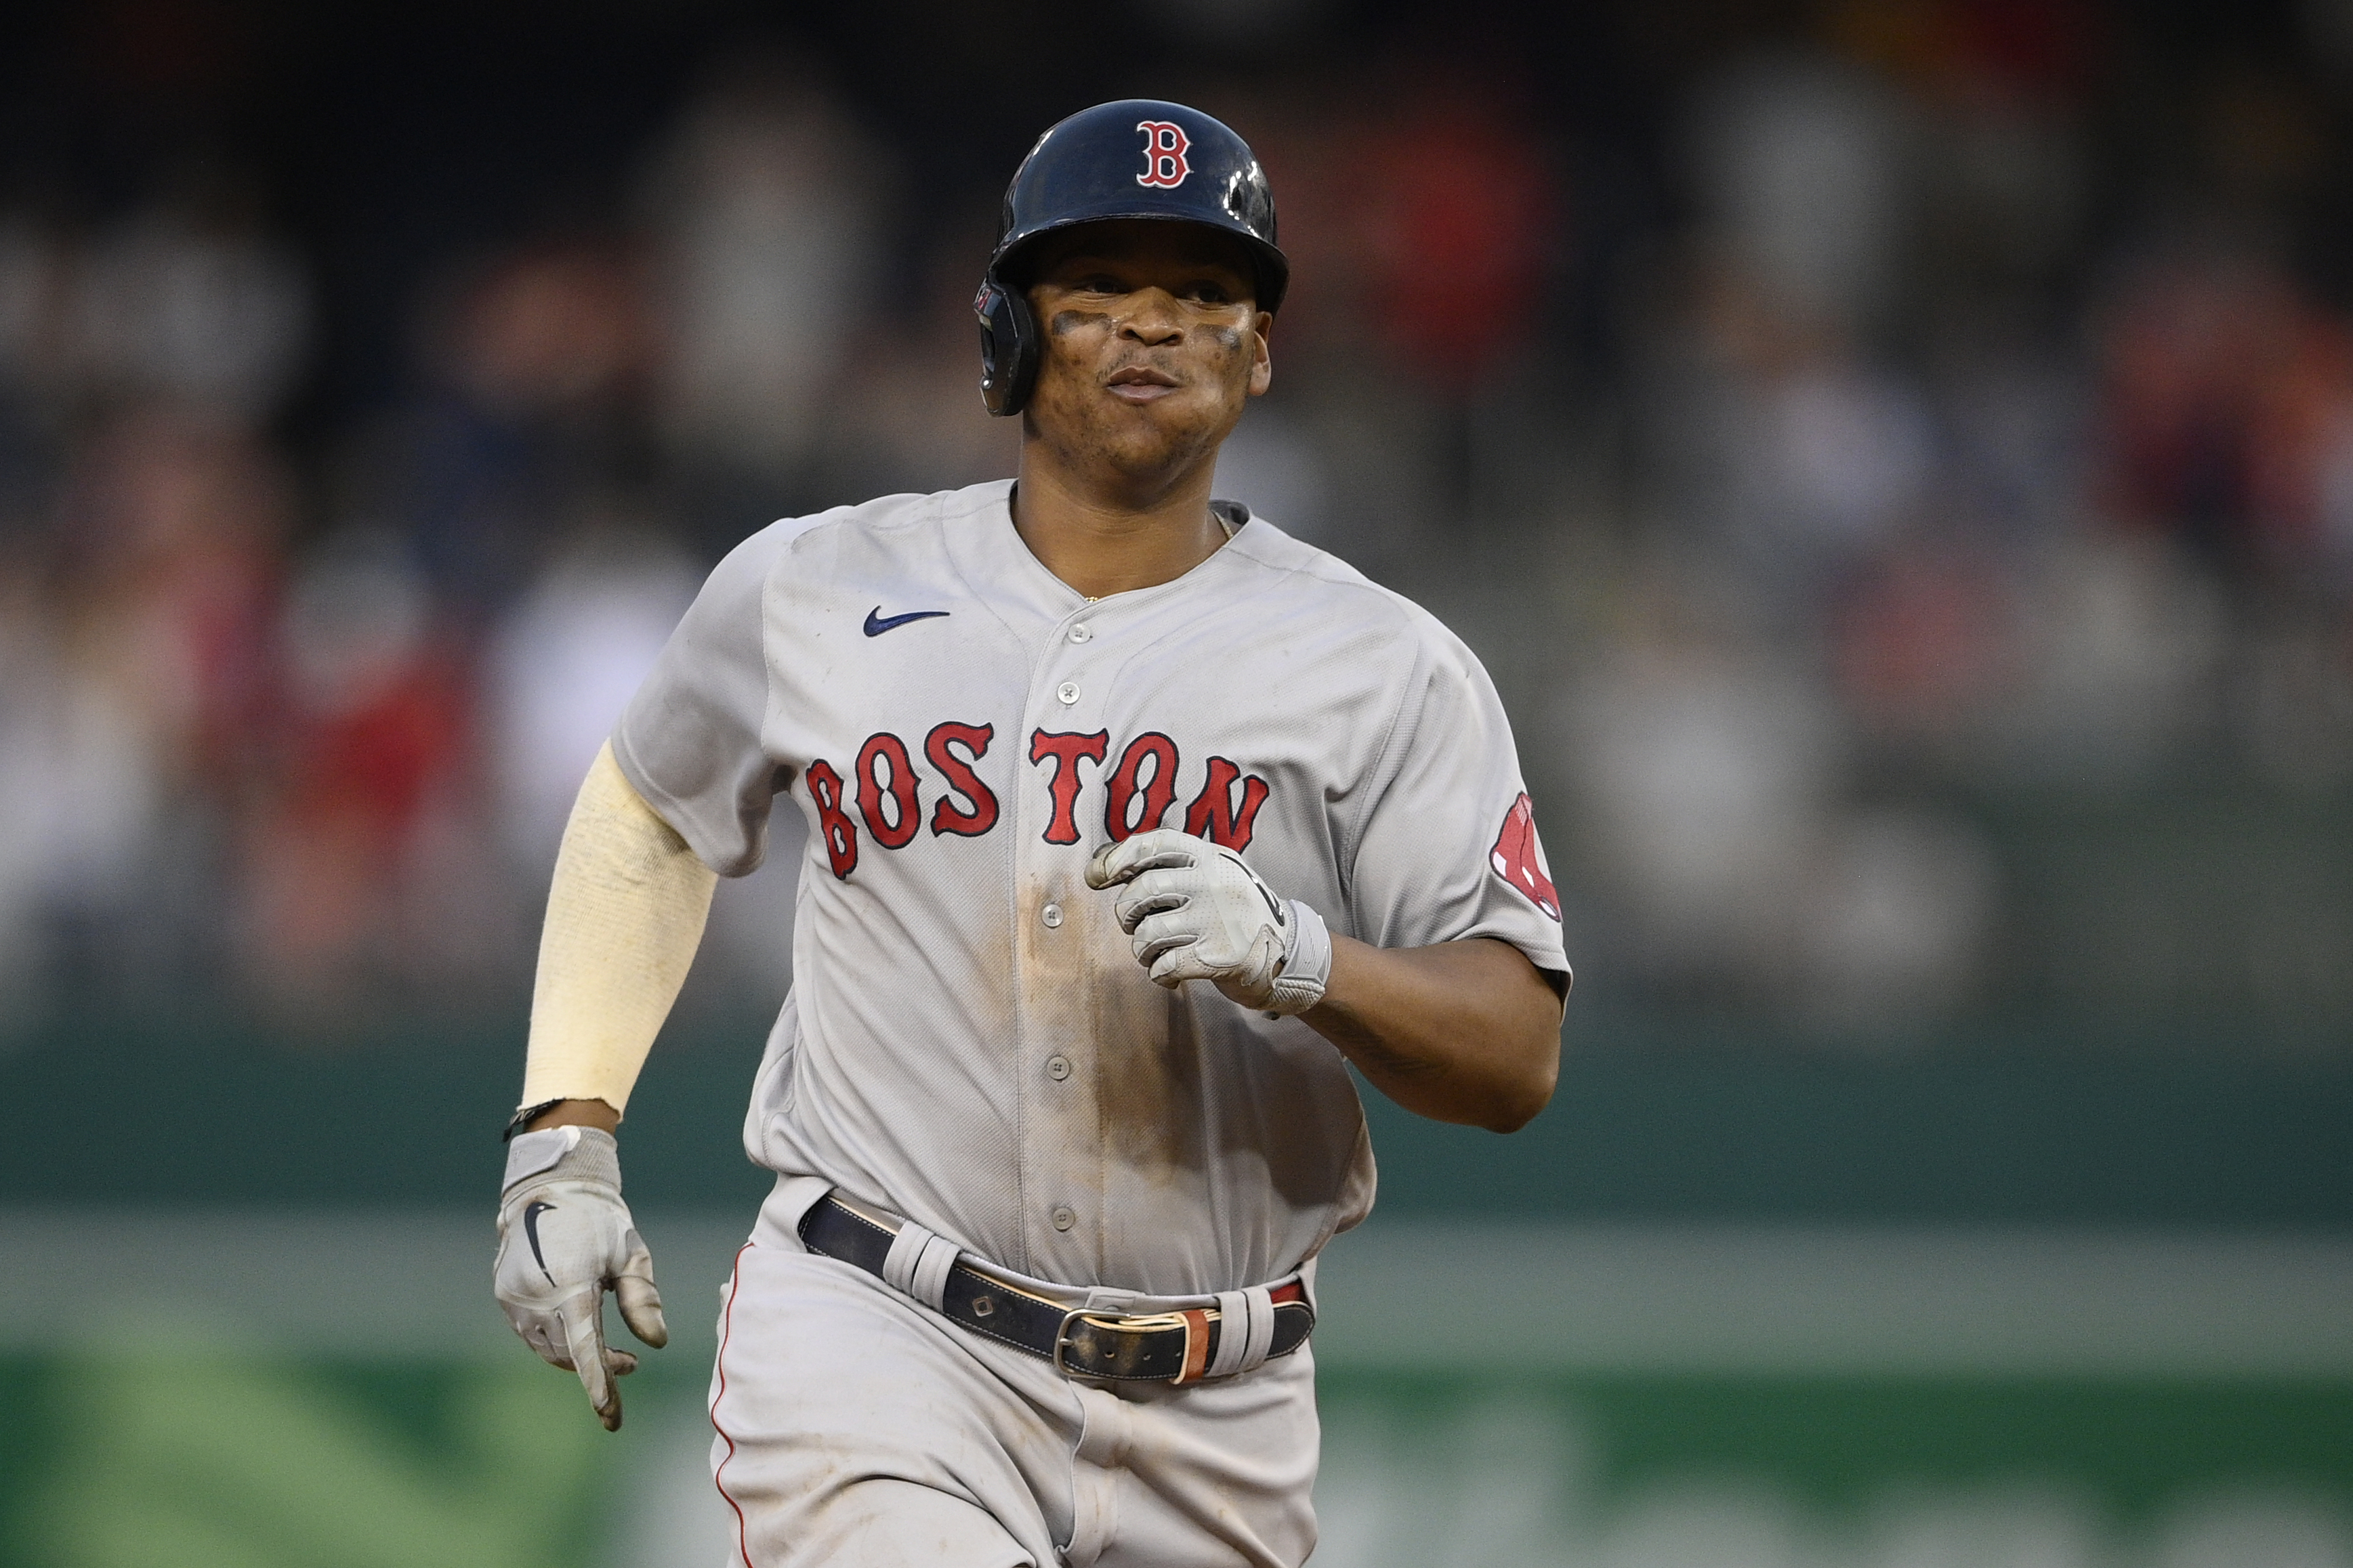 Film study: A closer look at Rafael Devers's special skill at the plate -  The Boston Globe